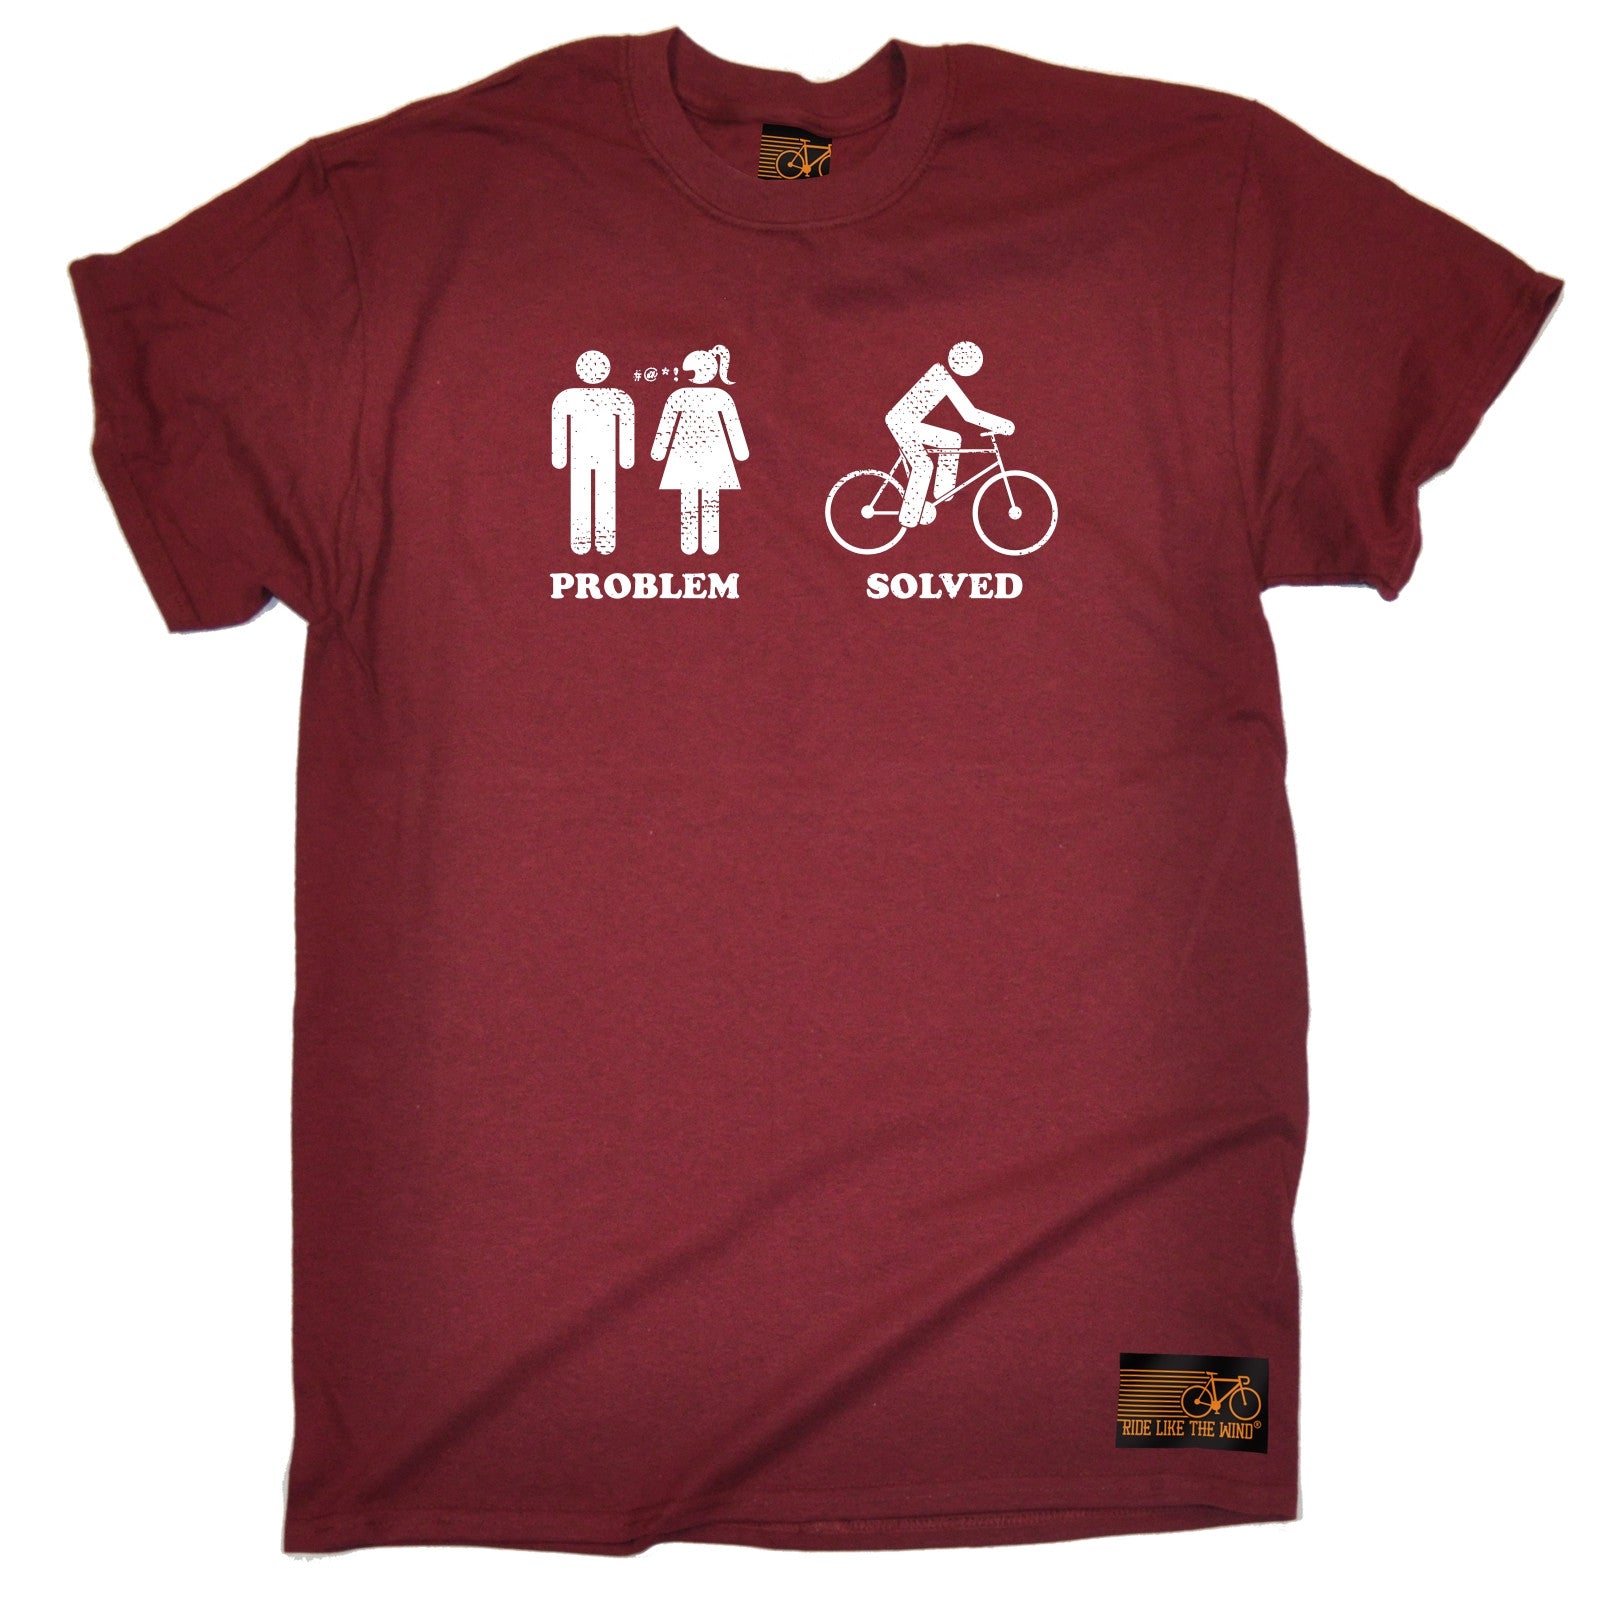 Problem Solved Cycling T-SHIRT Top Cycle Jersey Joke Funny birthday gift | eBay